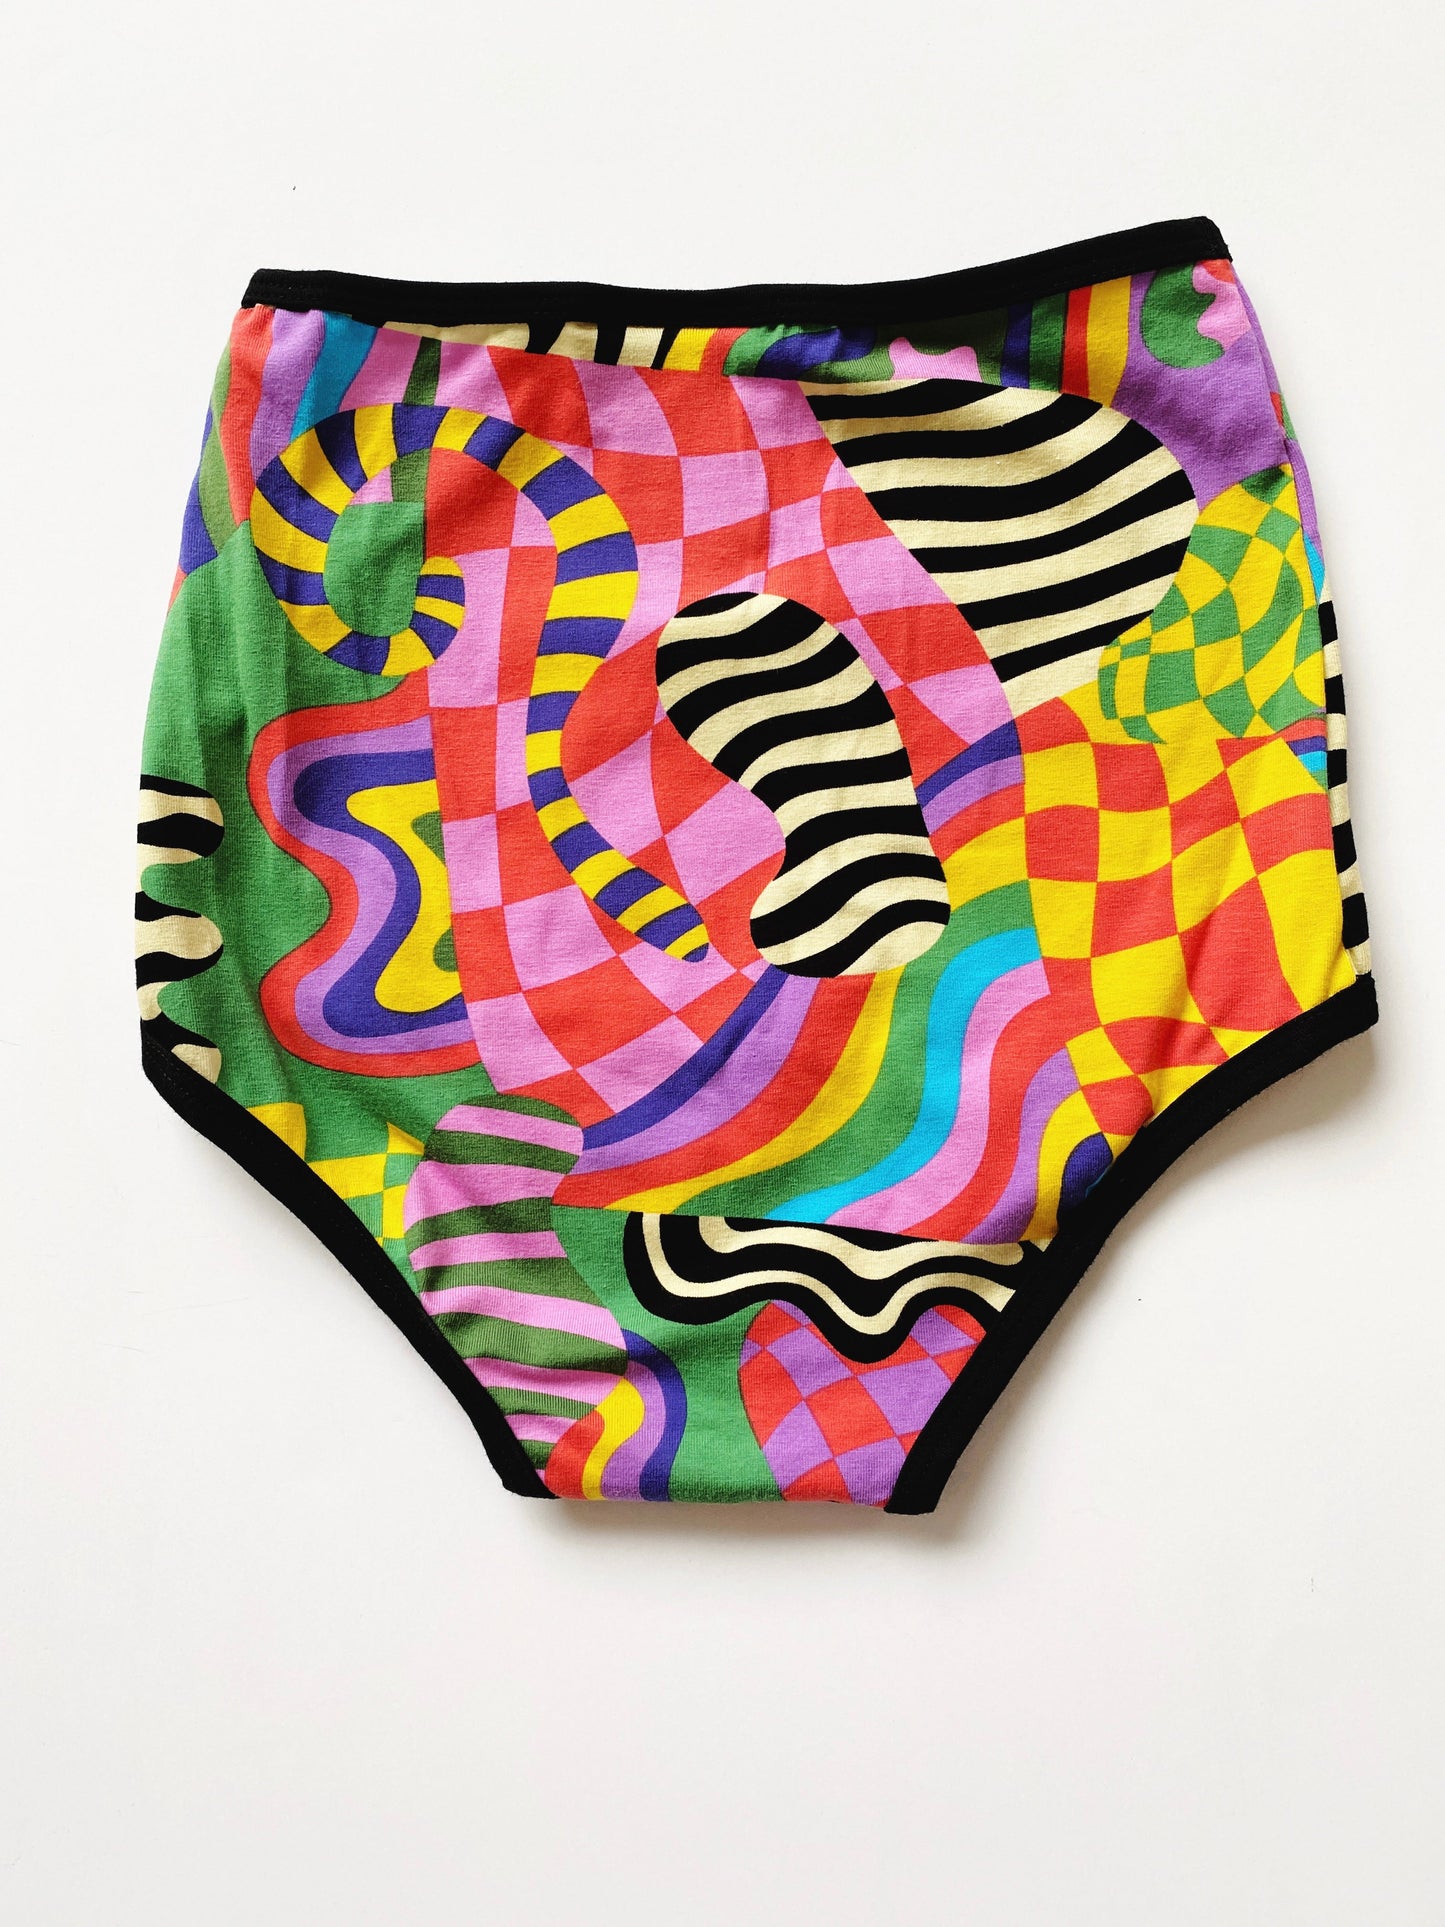 Party Time Underwear by Nooworks